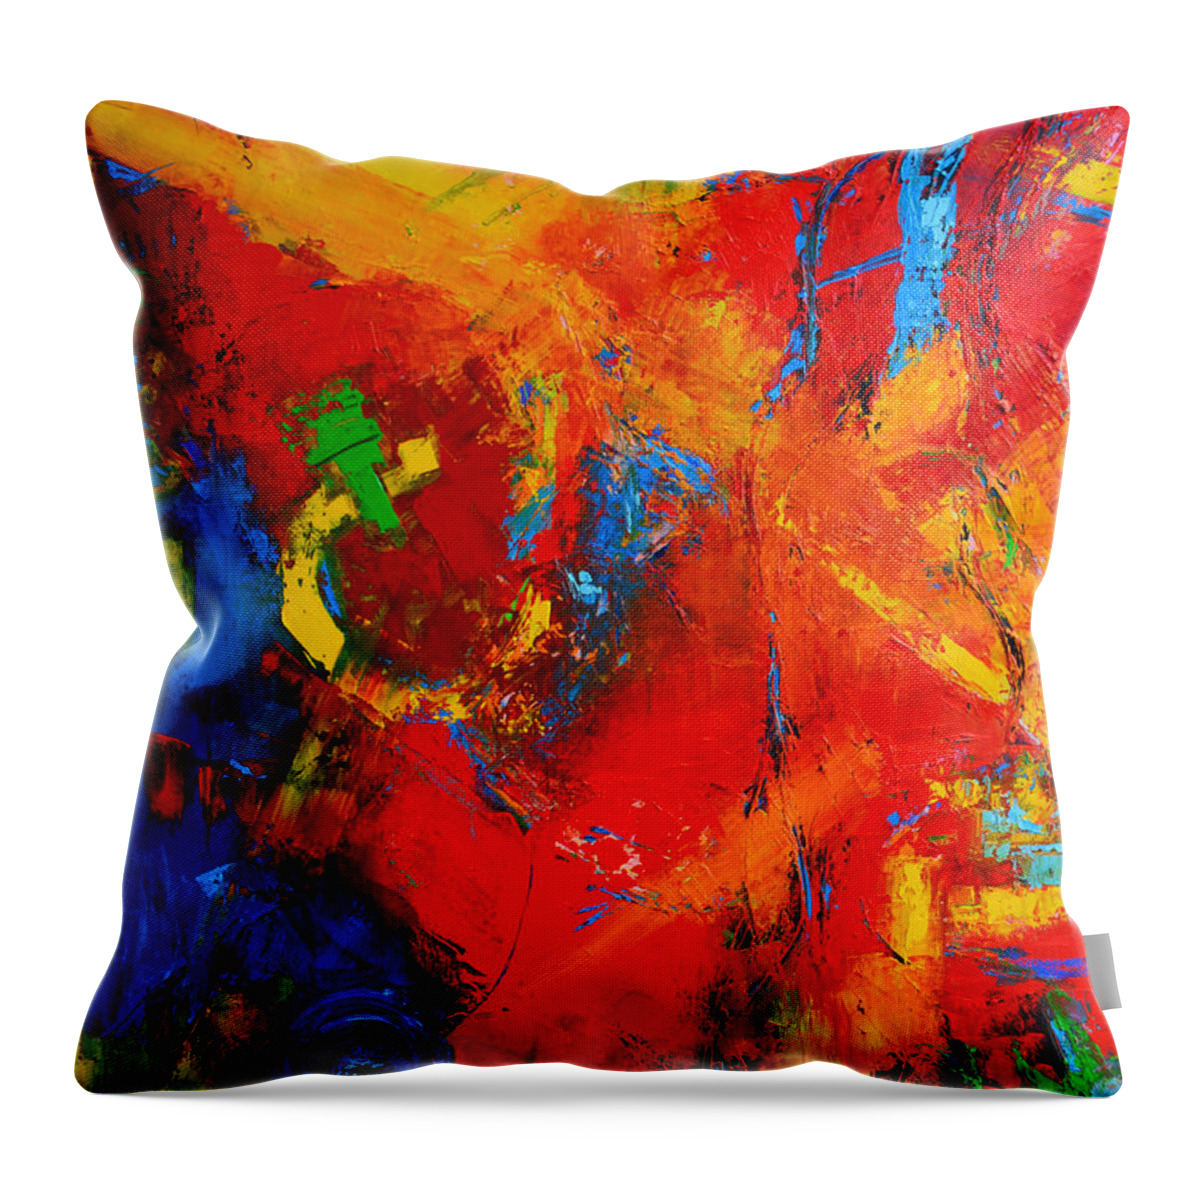 Something About You Abstract Oil Painting Throw Pillow featuring the painting Something About You Modern Abstract Oil Painting Palette Knife work by Patricia Awapara